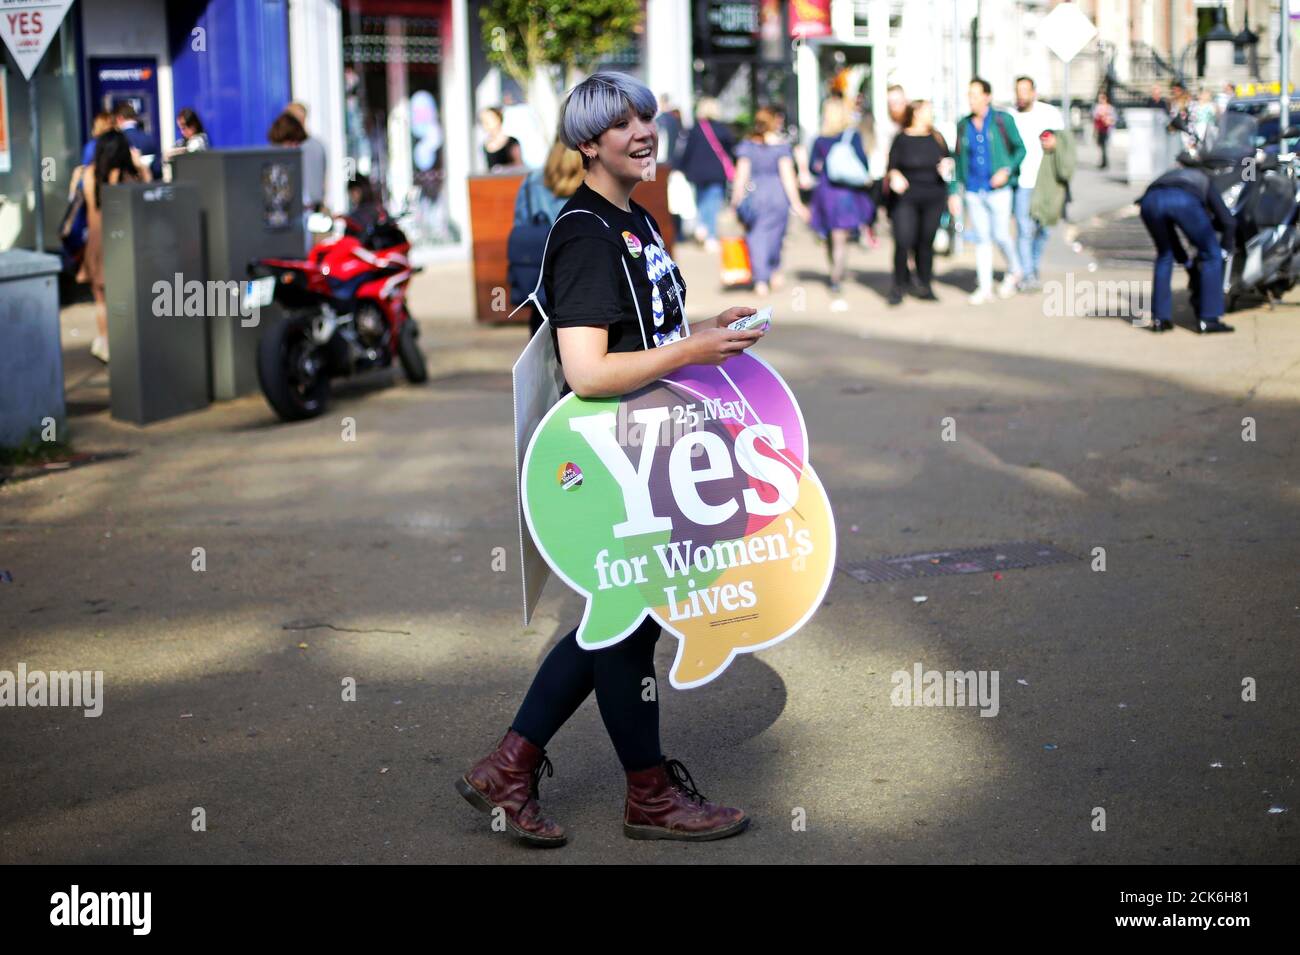 A woman carries a placard as Ireland holds a referendum on liberalising abortion laws, in Dublin, Ireland, May 25, 2018. REUTERS/Max Rossi Stock Photo